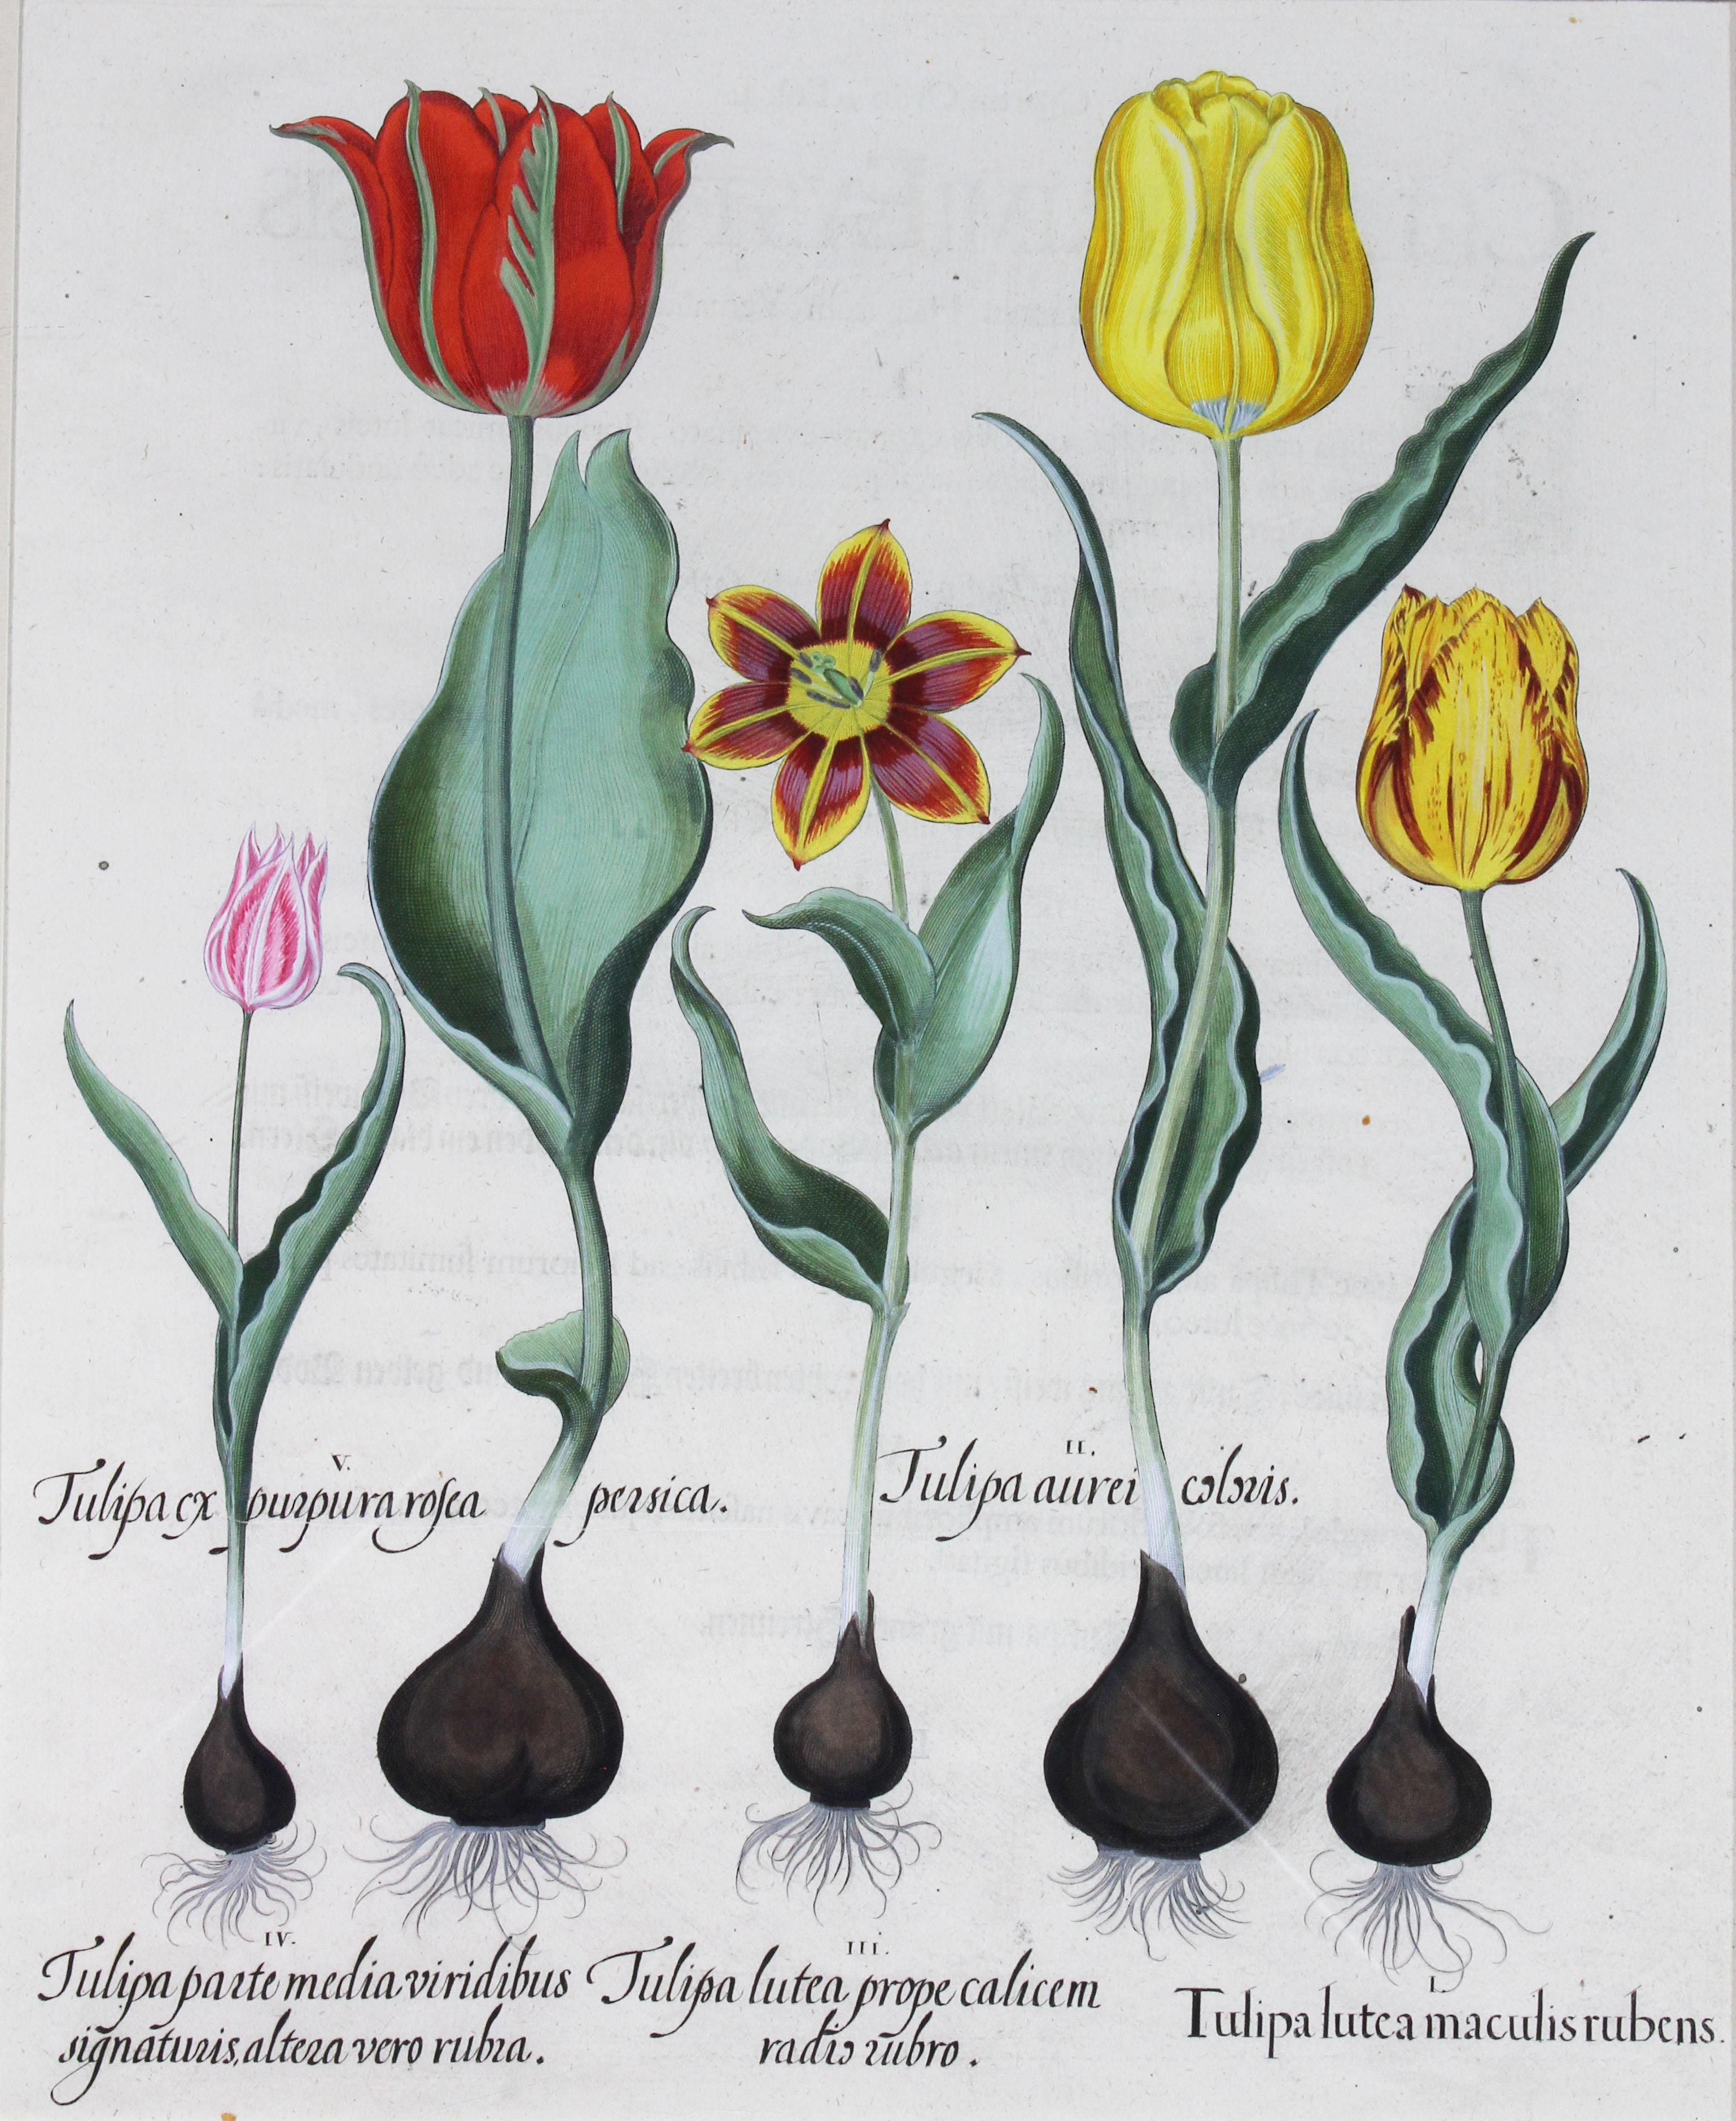 Each with crisp vivid colors of the most desirable tulip series.